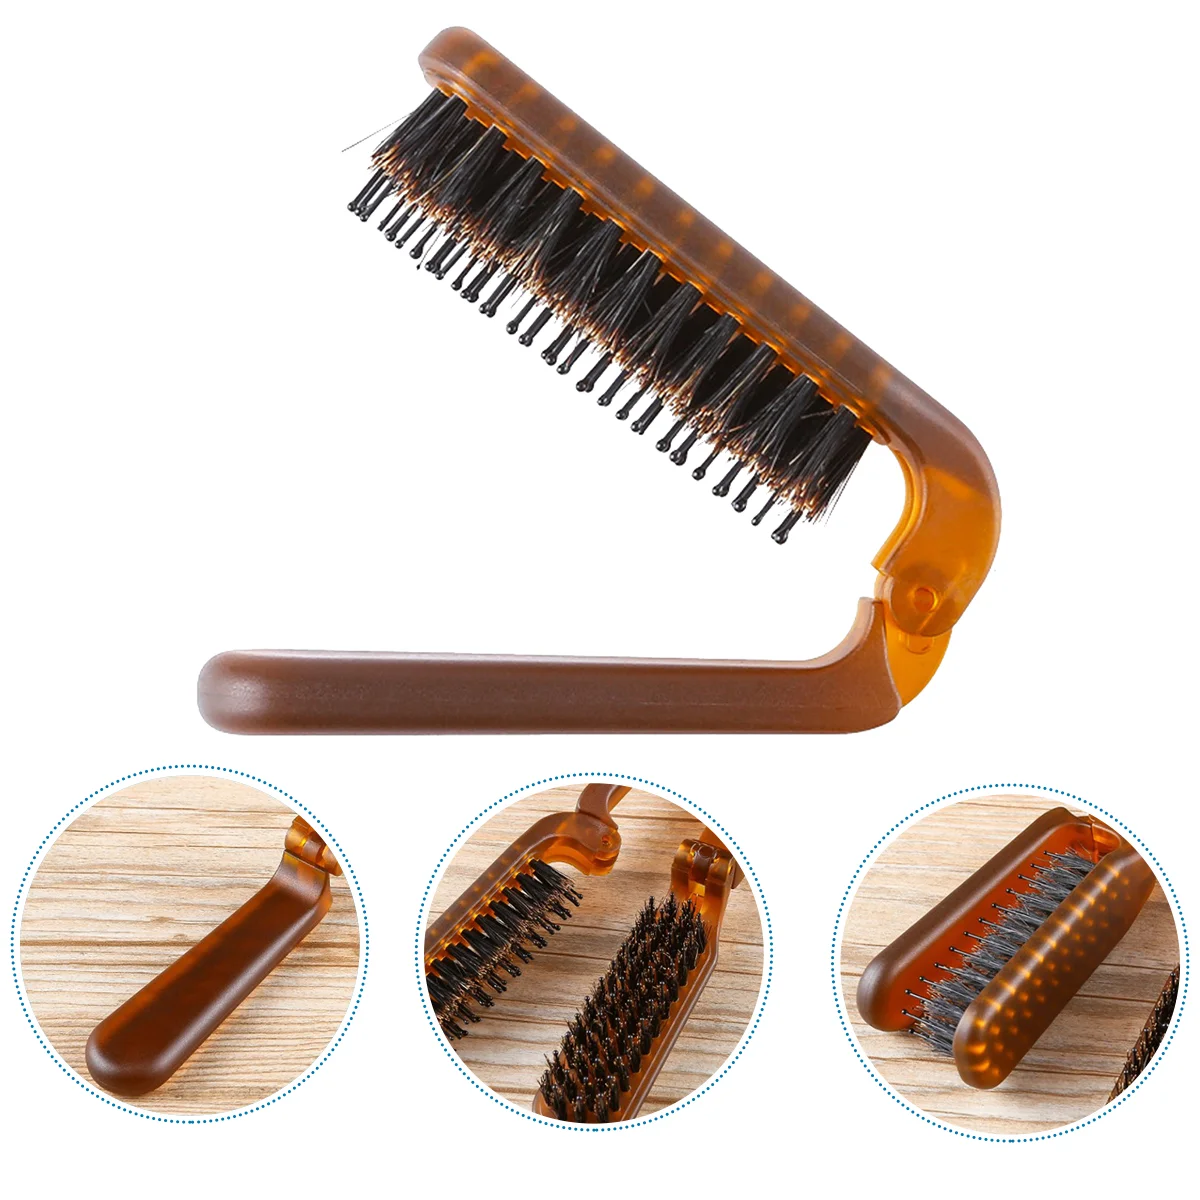 

Folding Hair Trimmers Hair Trimmers Hairstyling Comb Hair Beard For Thin And Thick Hair Trimming Styling Brown